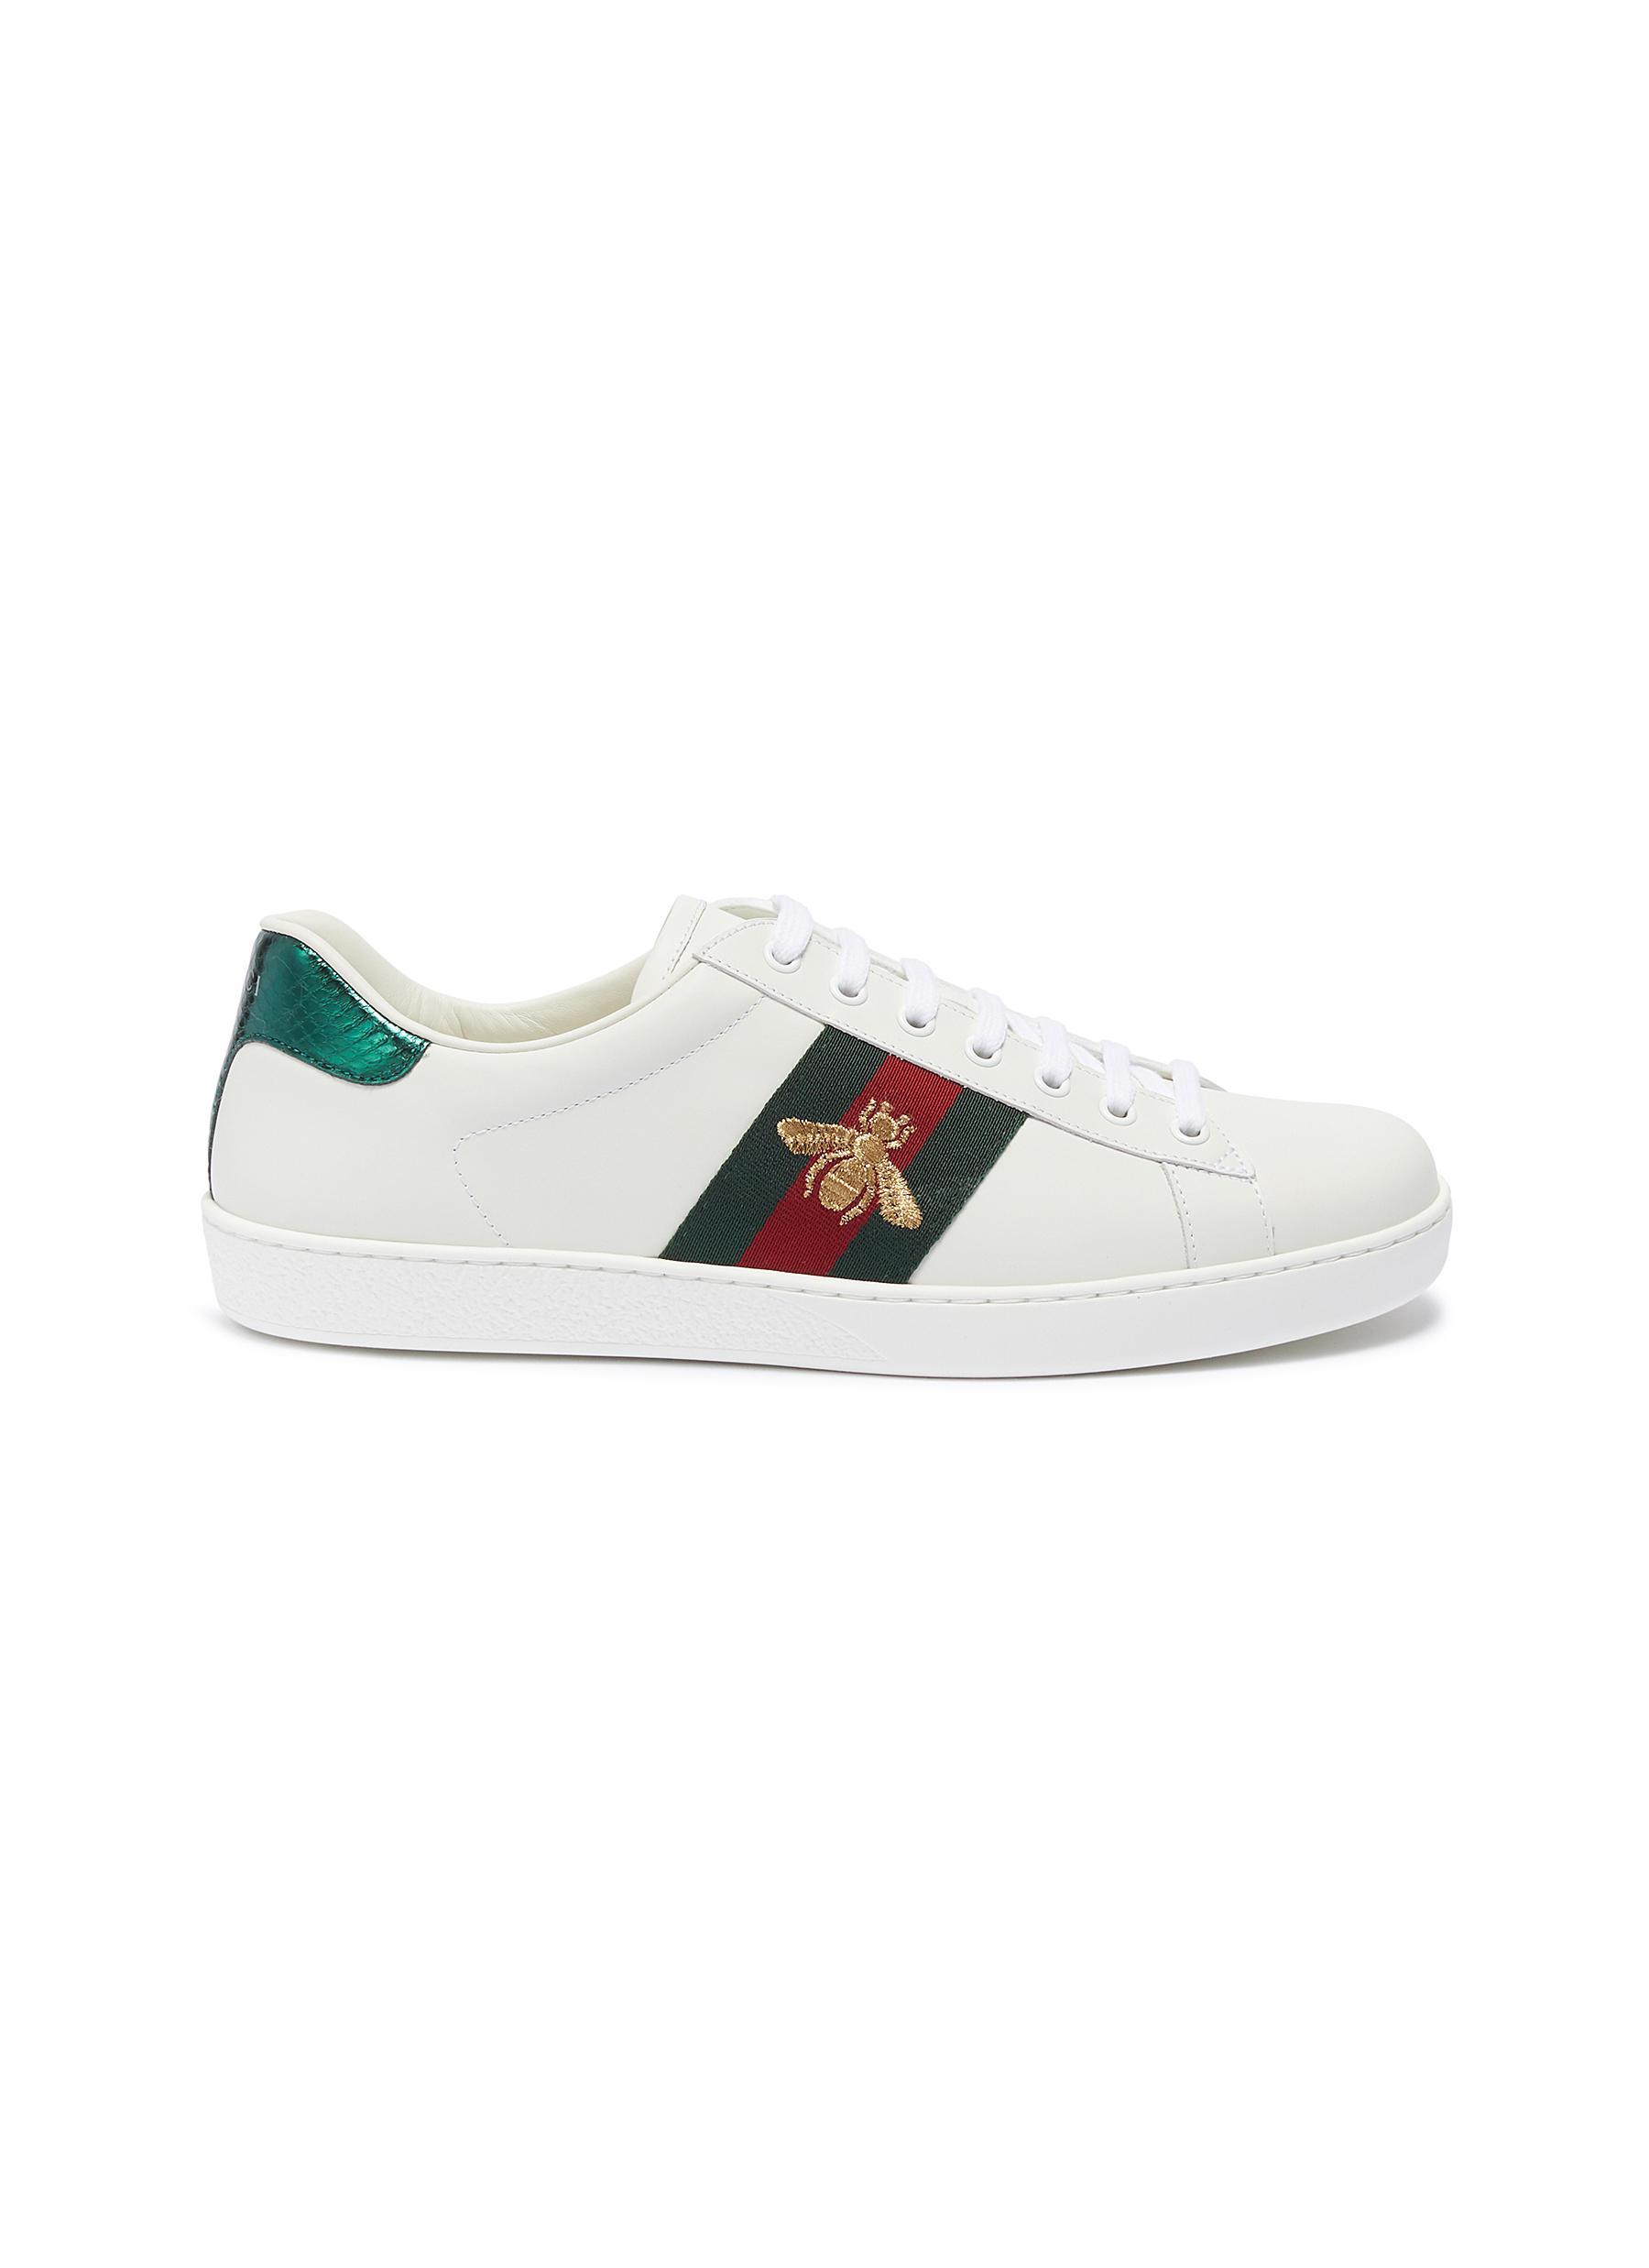 Gucci 'ace' Bee Embroidered Web Stripe Leather Sneakers in White for ...